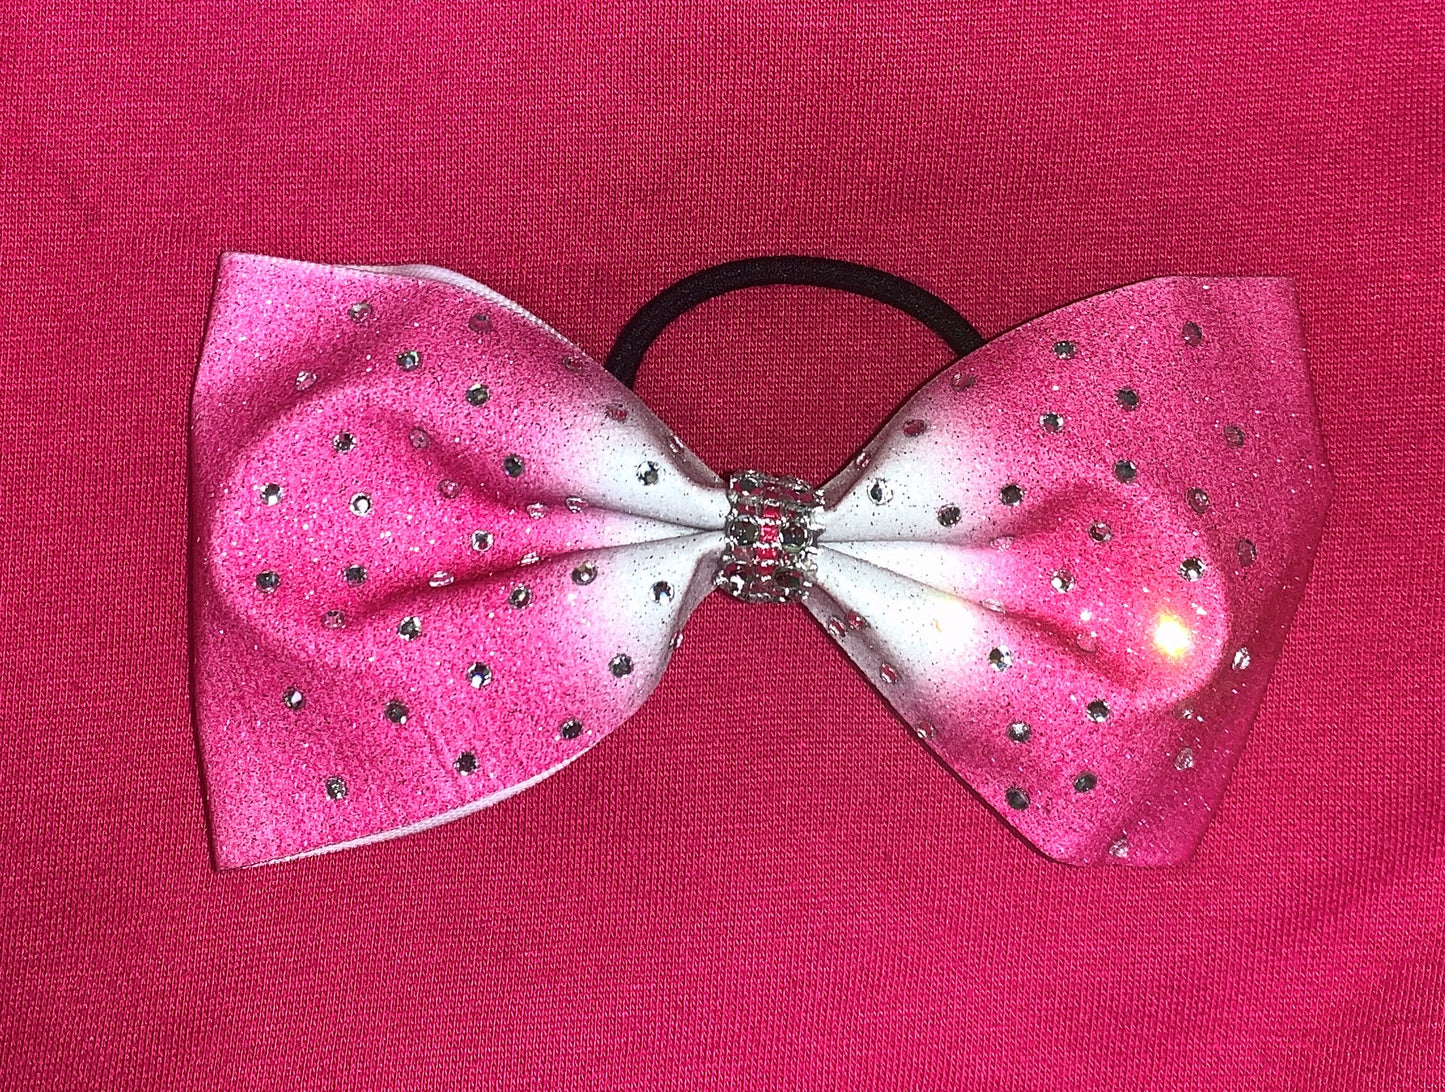 Ace High Cheer Bows